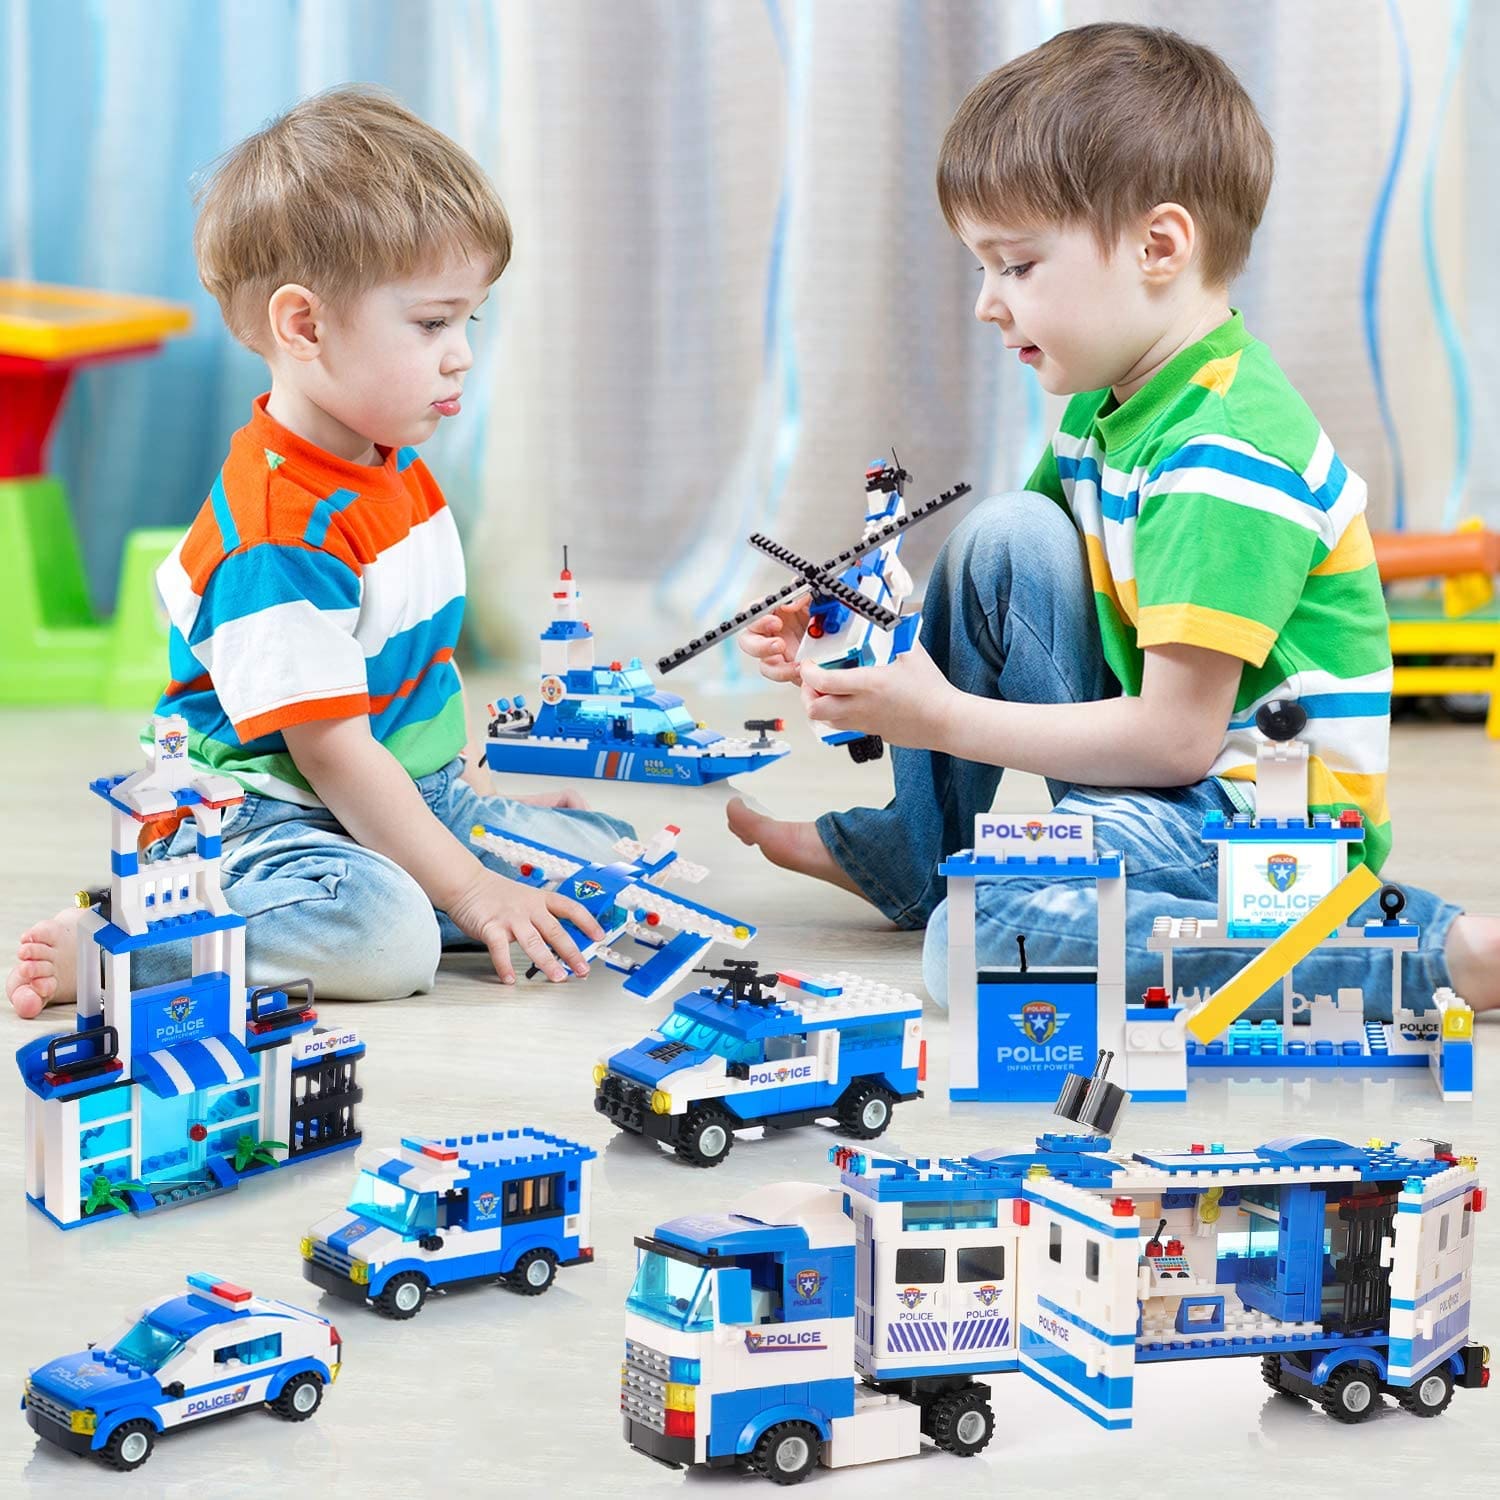 8IN1 City Police Car Building Blocks Toy for Children